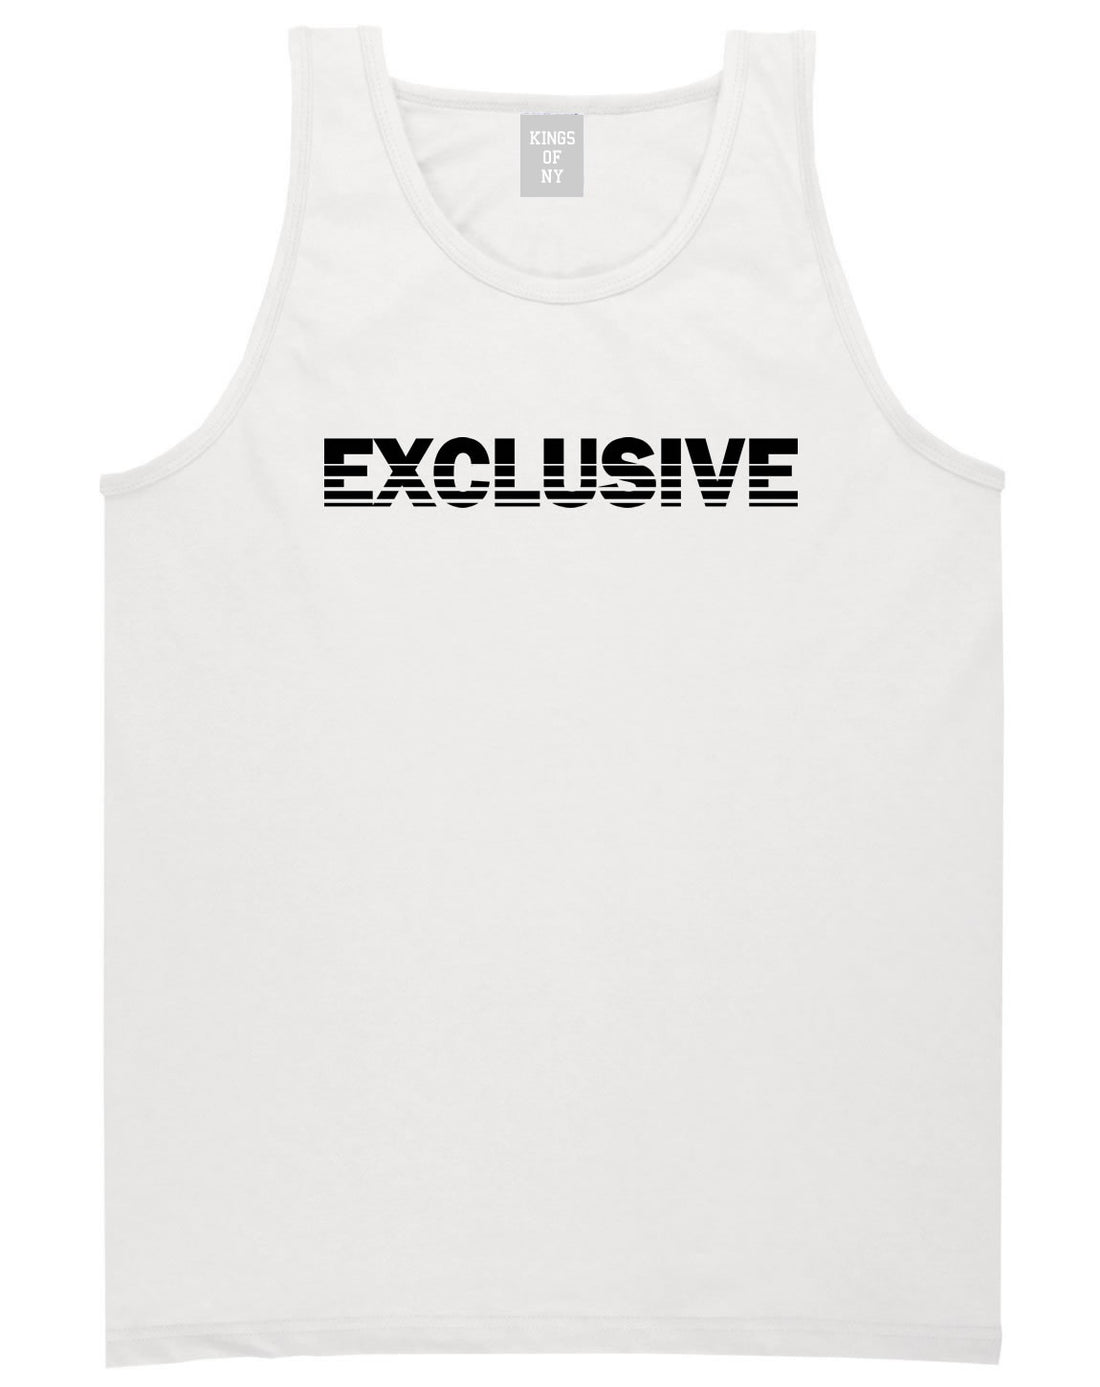 Exclusive Racing Style Tank Top in White by Kings Of NY